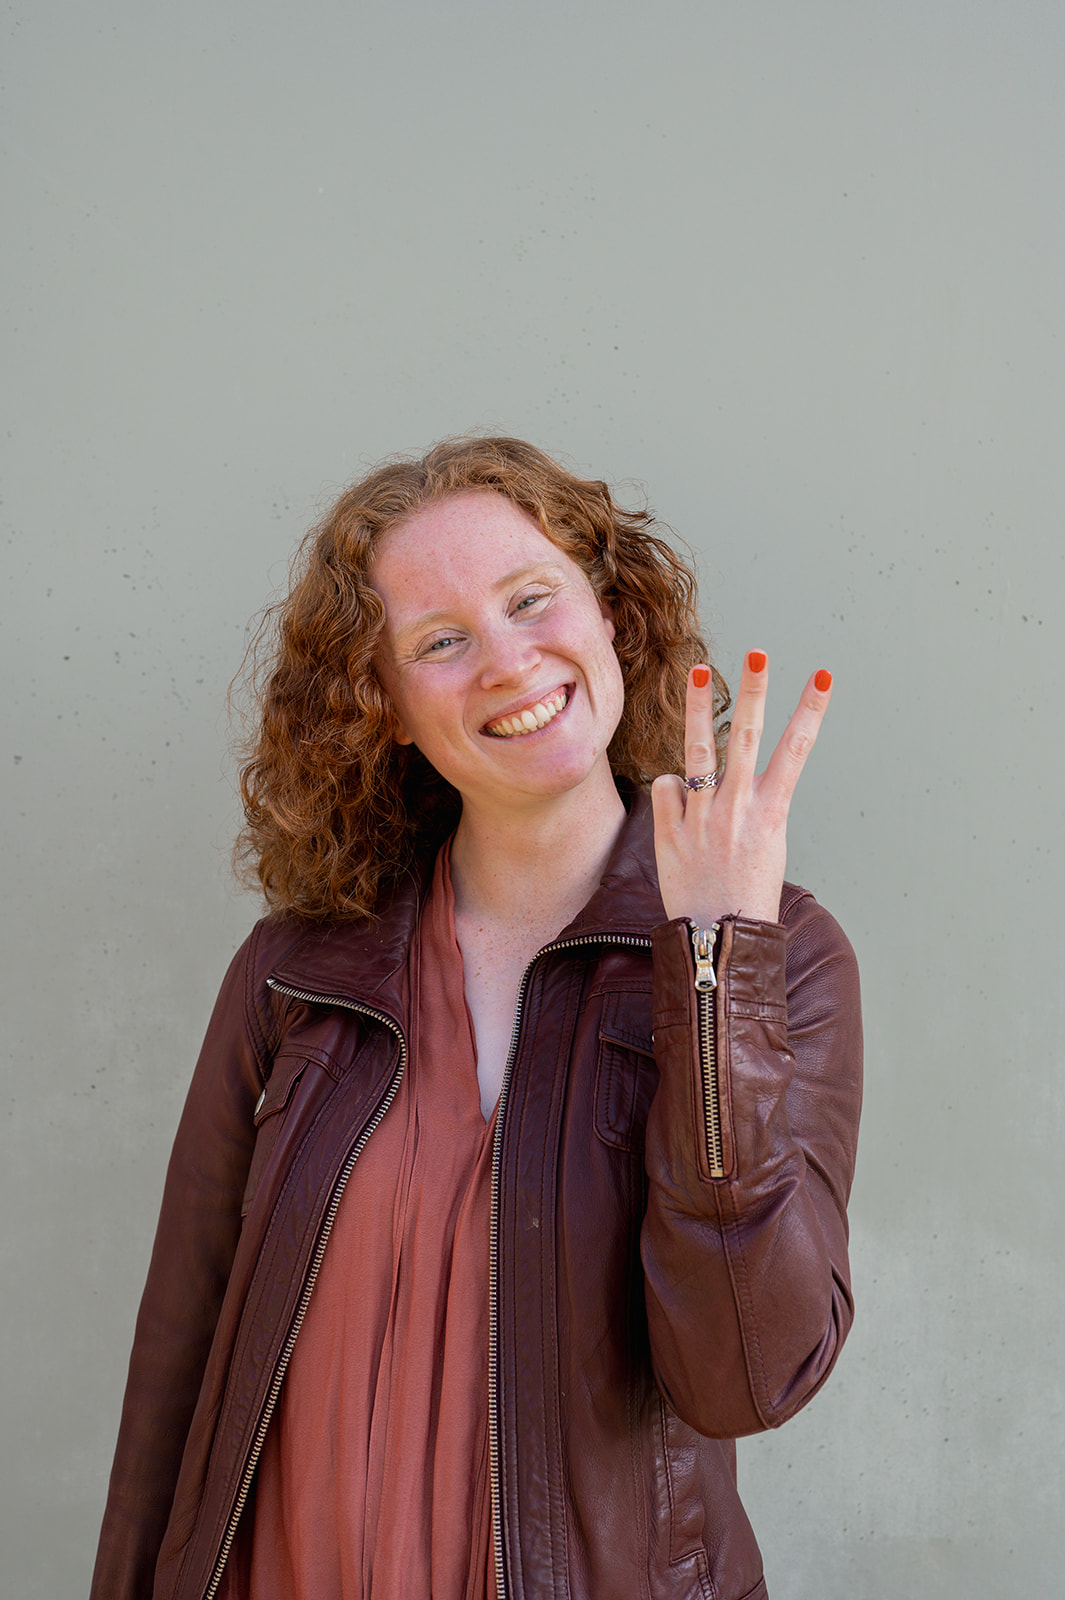 Red haired woman in a burgundy leather jacket standing against a beige concrete wall, holding 3 fingers up in the air.